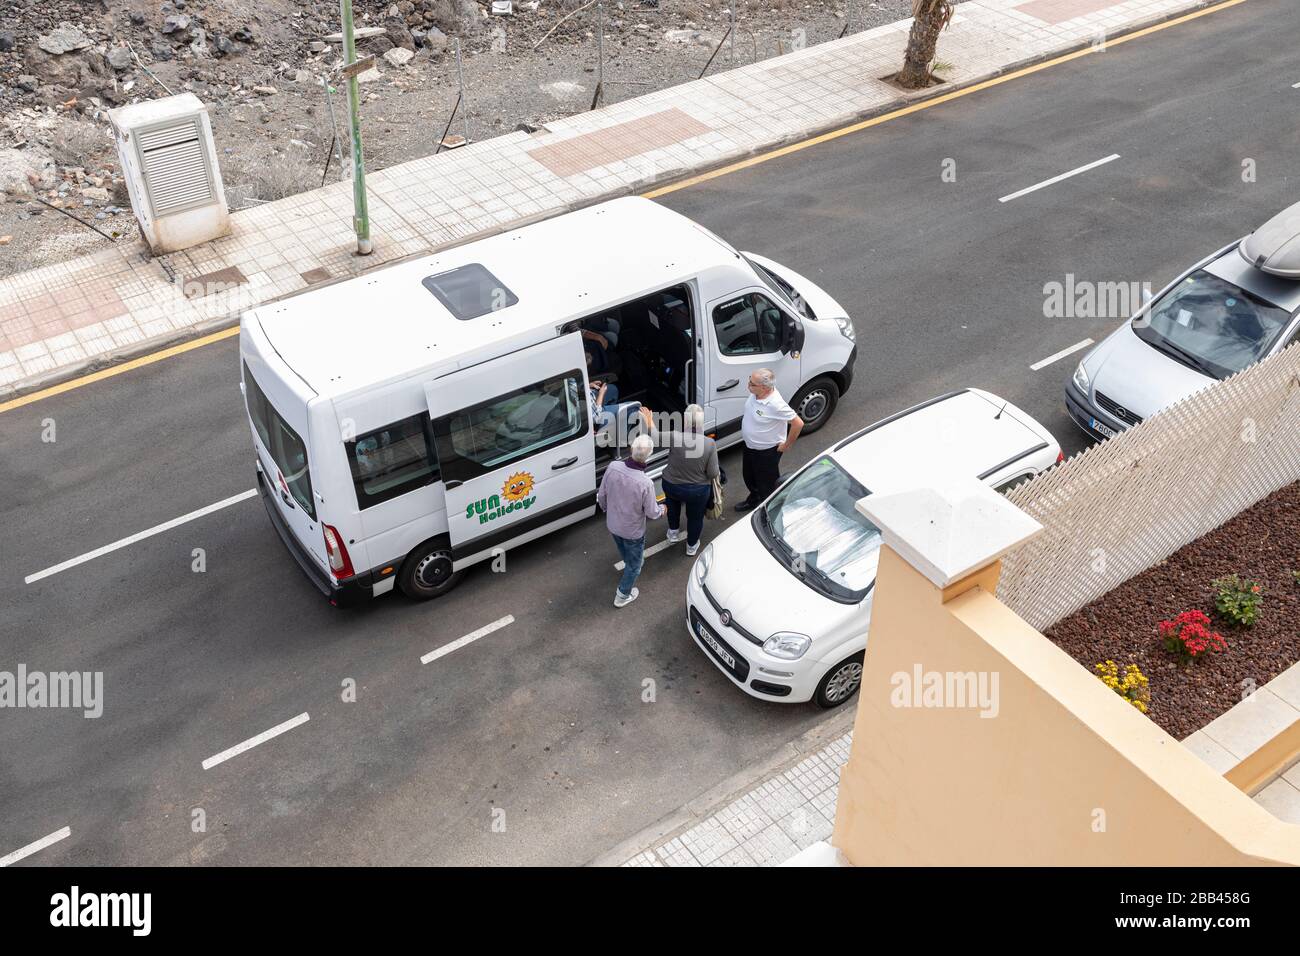 Tourists are picked up in a mini coach to go to the airport during the coronavirus lockdown. Playa San Juan, Tenerife, Canary Islands, Spain. Stock Photo